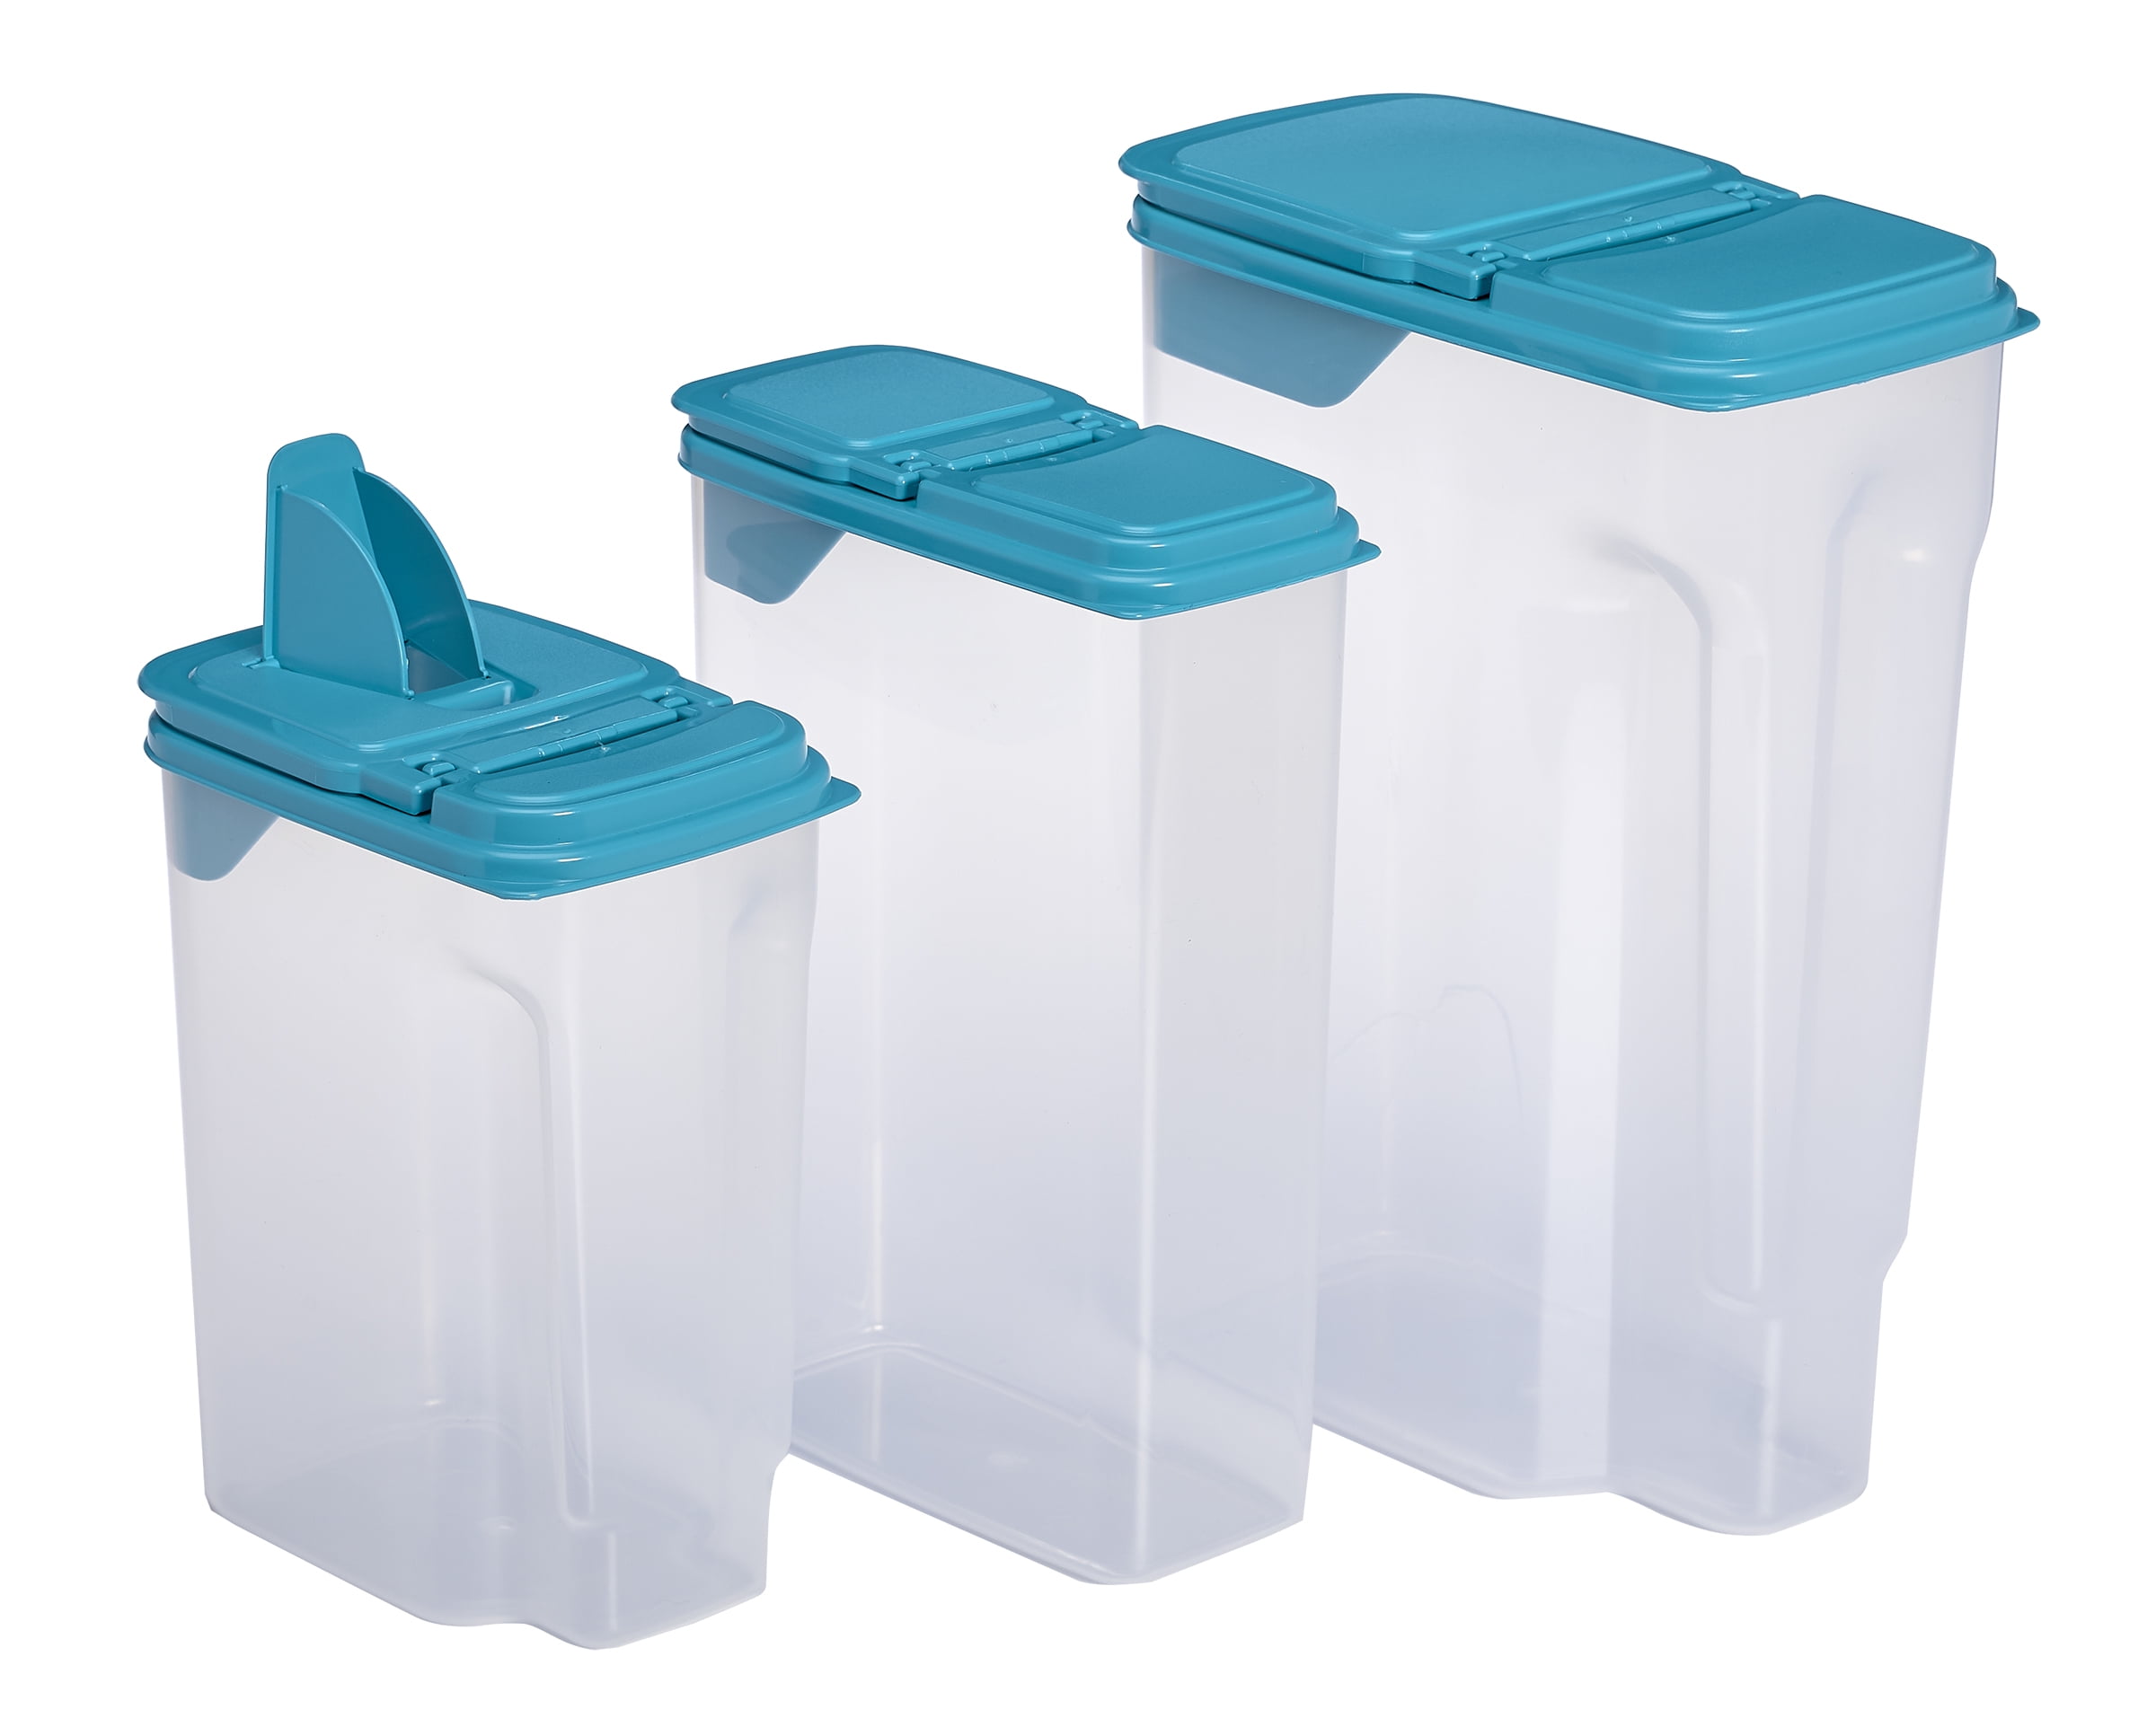 Mainstays Plastic Food Storage Containers with Flip-Top Lids, Set of 3